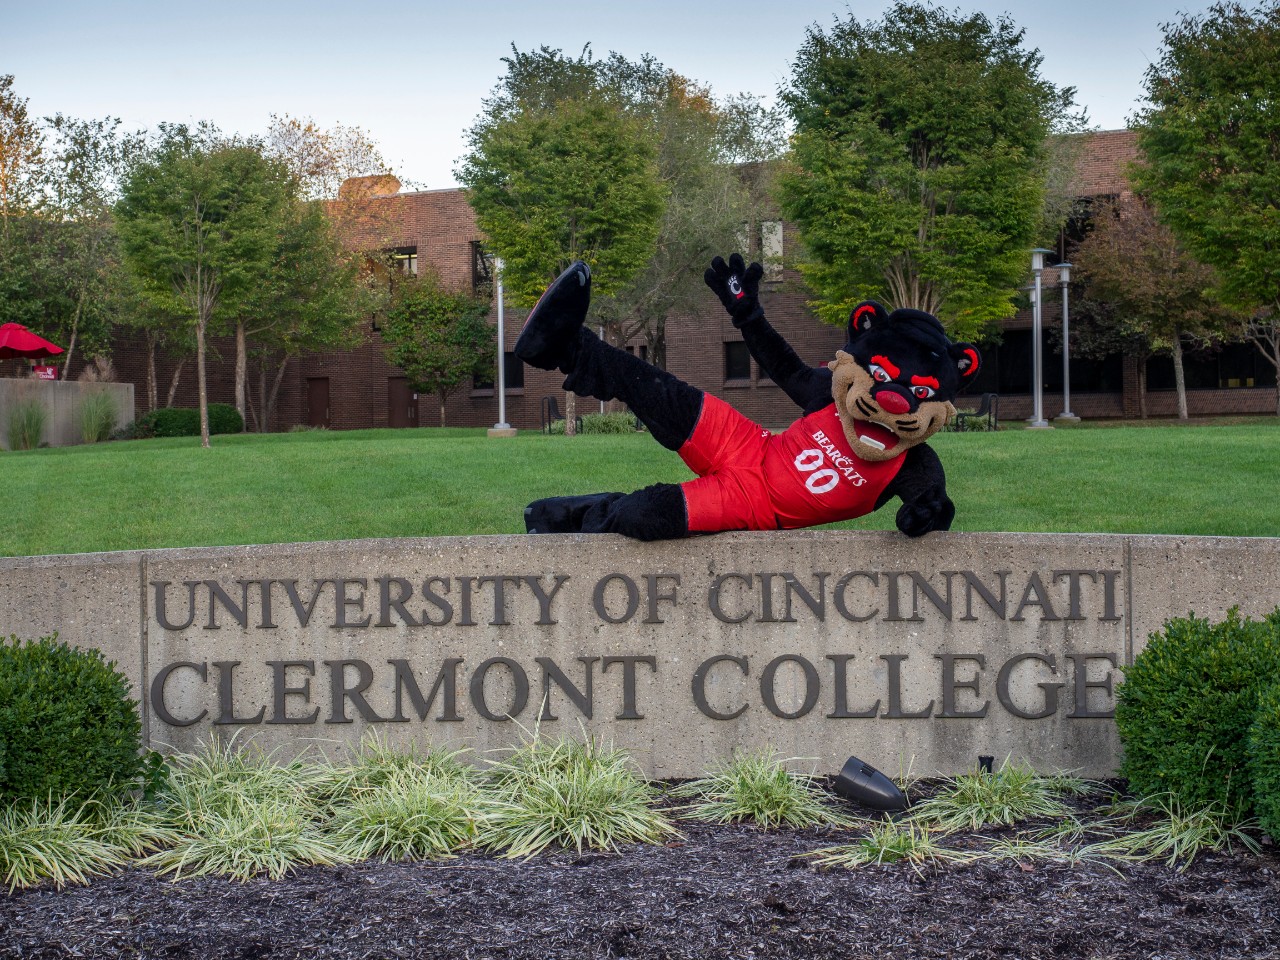 Bearcat poses on UC Clermont College sign in front of campus